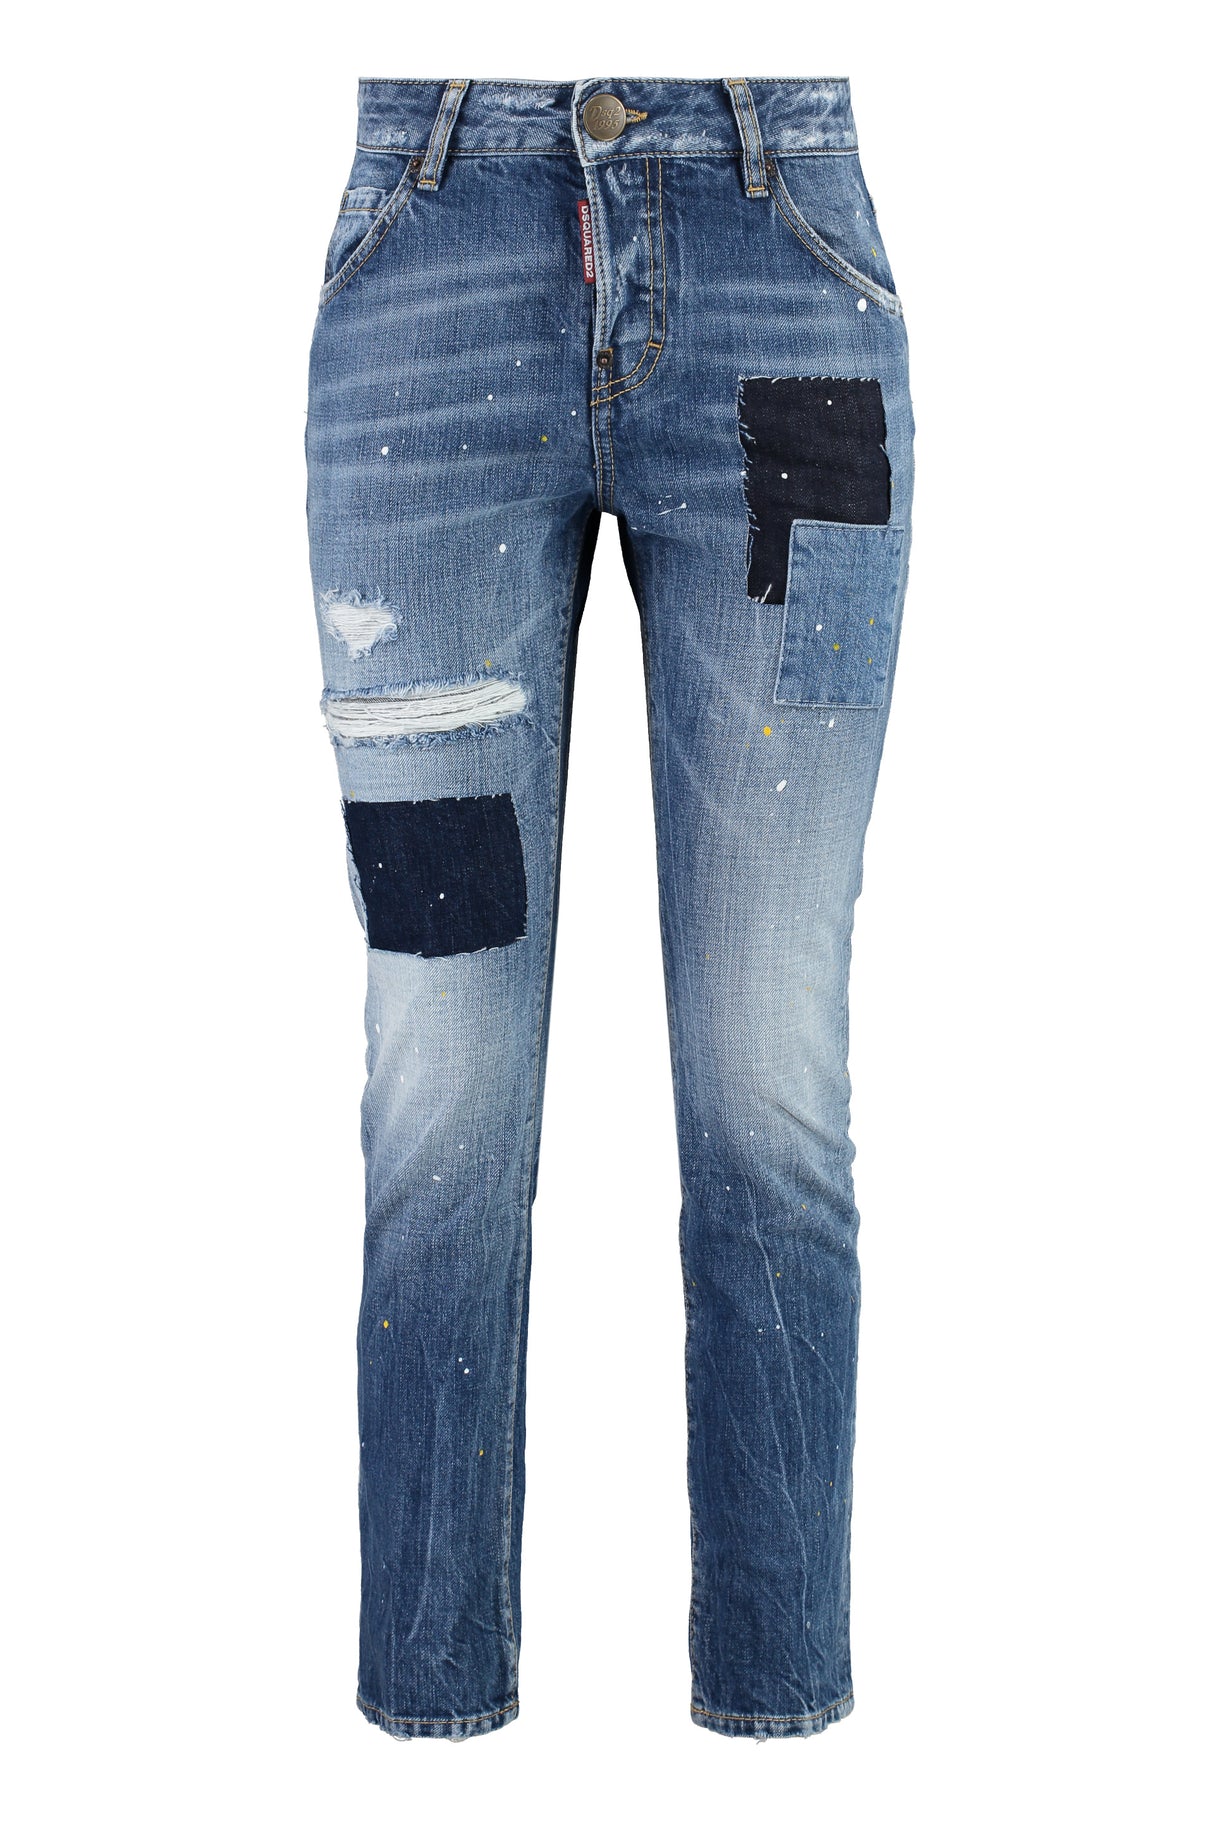 DSQUARED2 Cool Girl Cropped Jeans - Distressed with Paint Effect Print, 100% Cotton